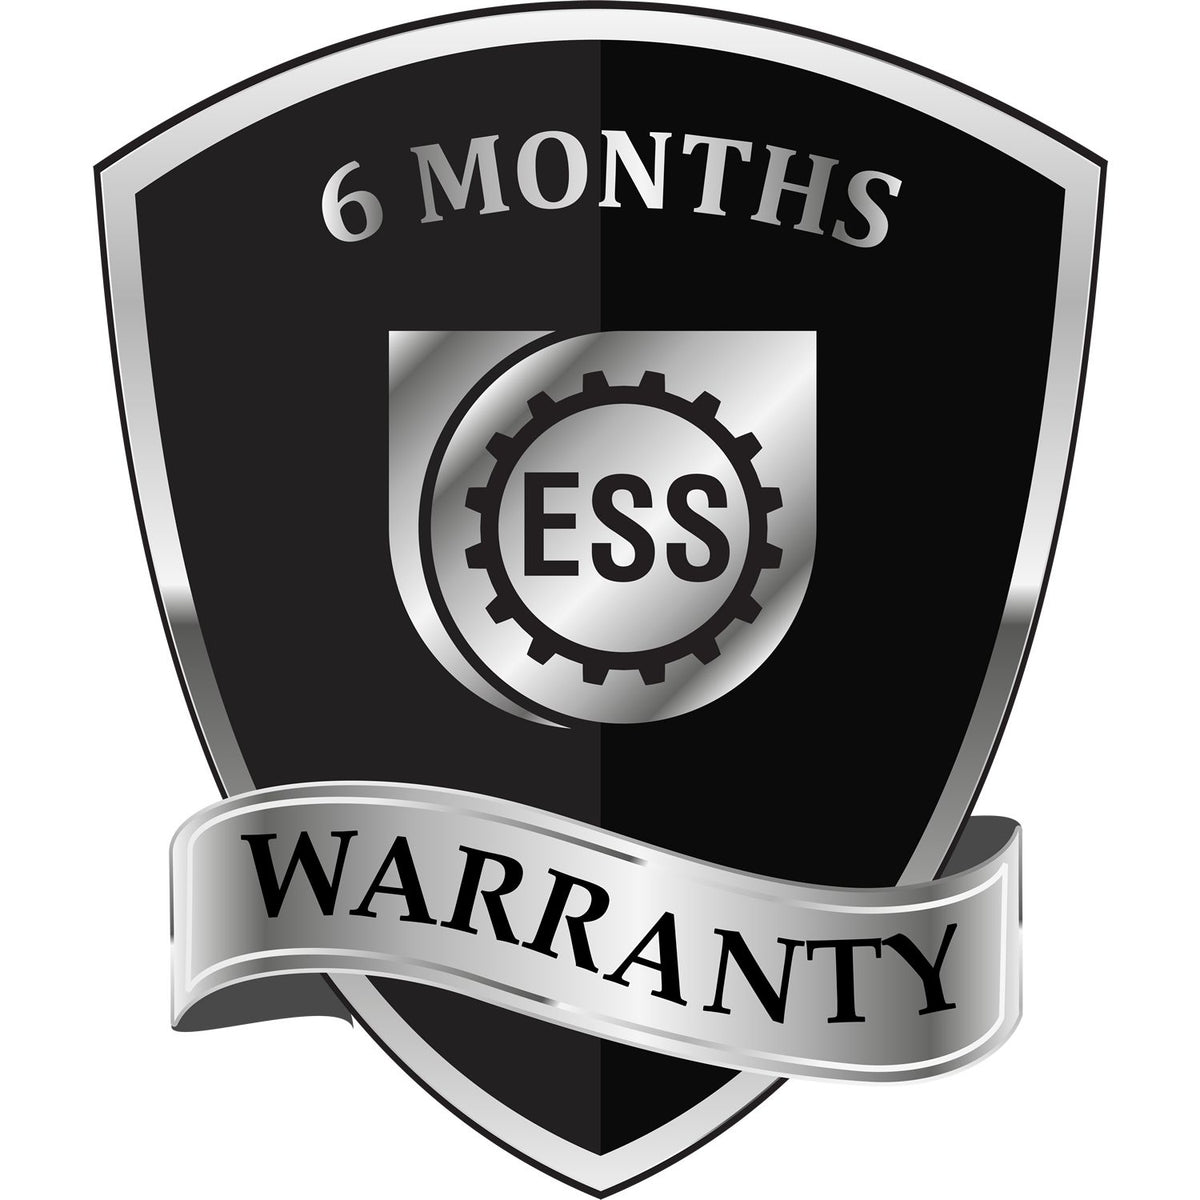 A badge or emblem showing a warranty icon for the Heavy-Duty Montana Rectangular Notary Stamp